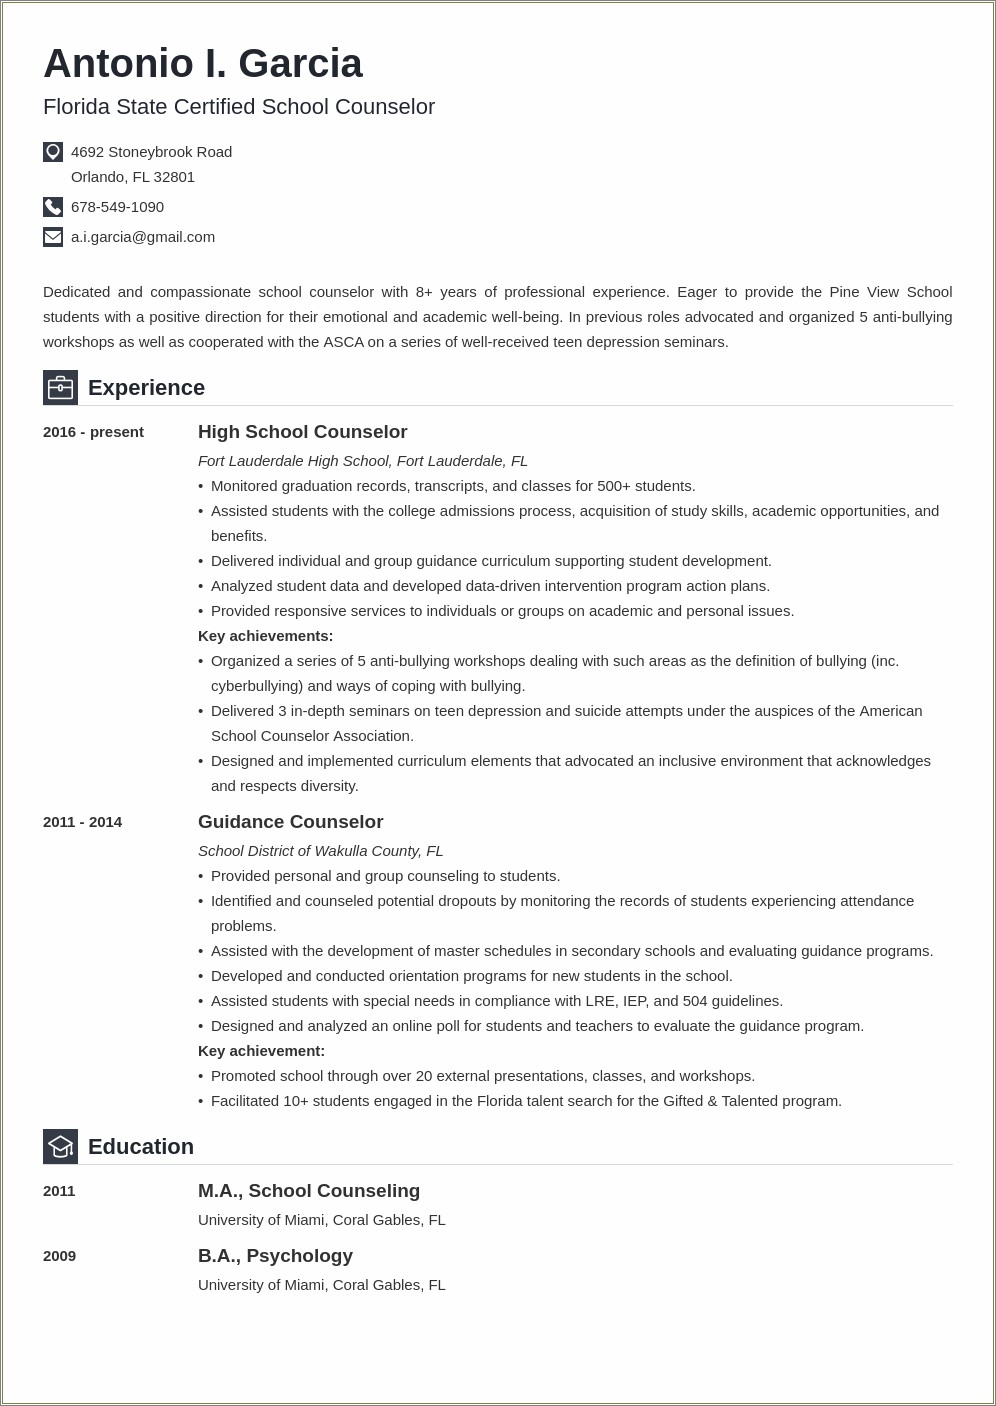 Sample Resume For High School Education Consultant